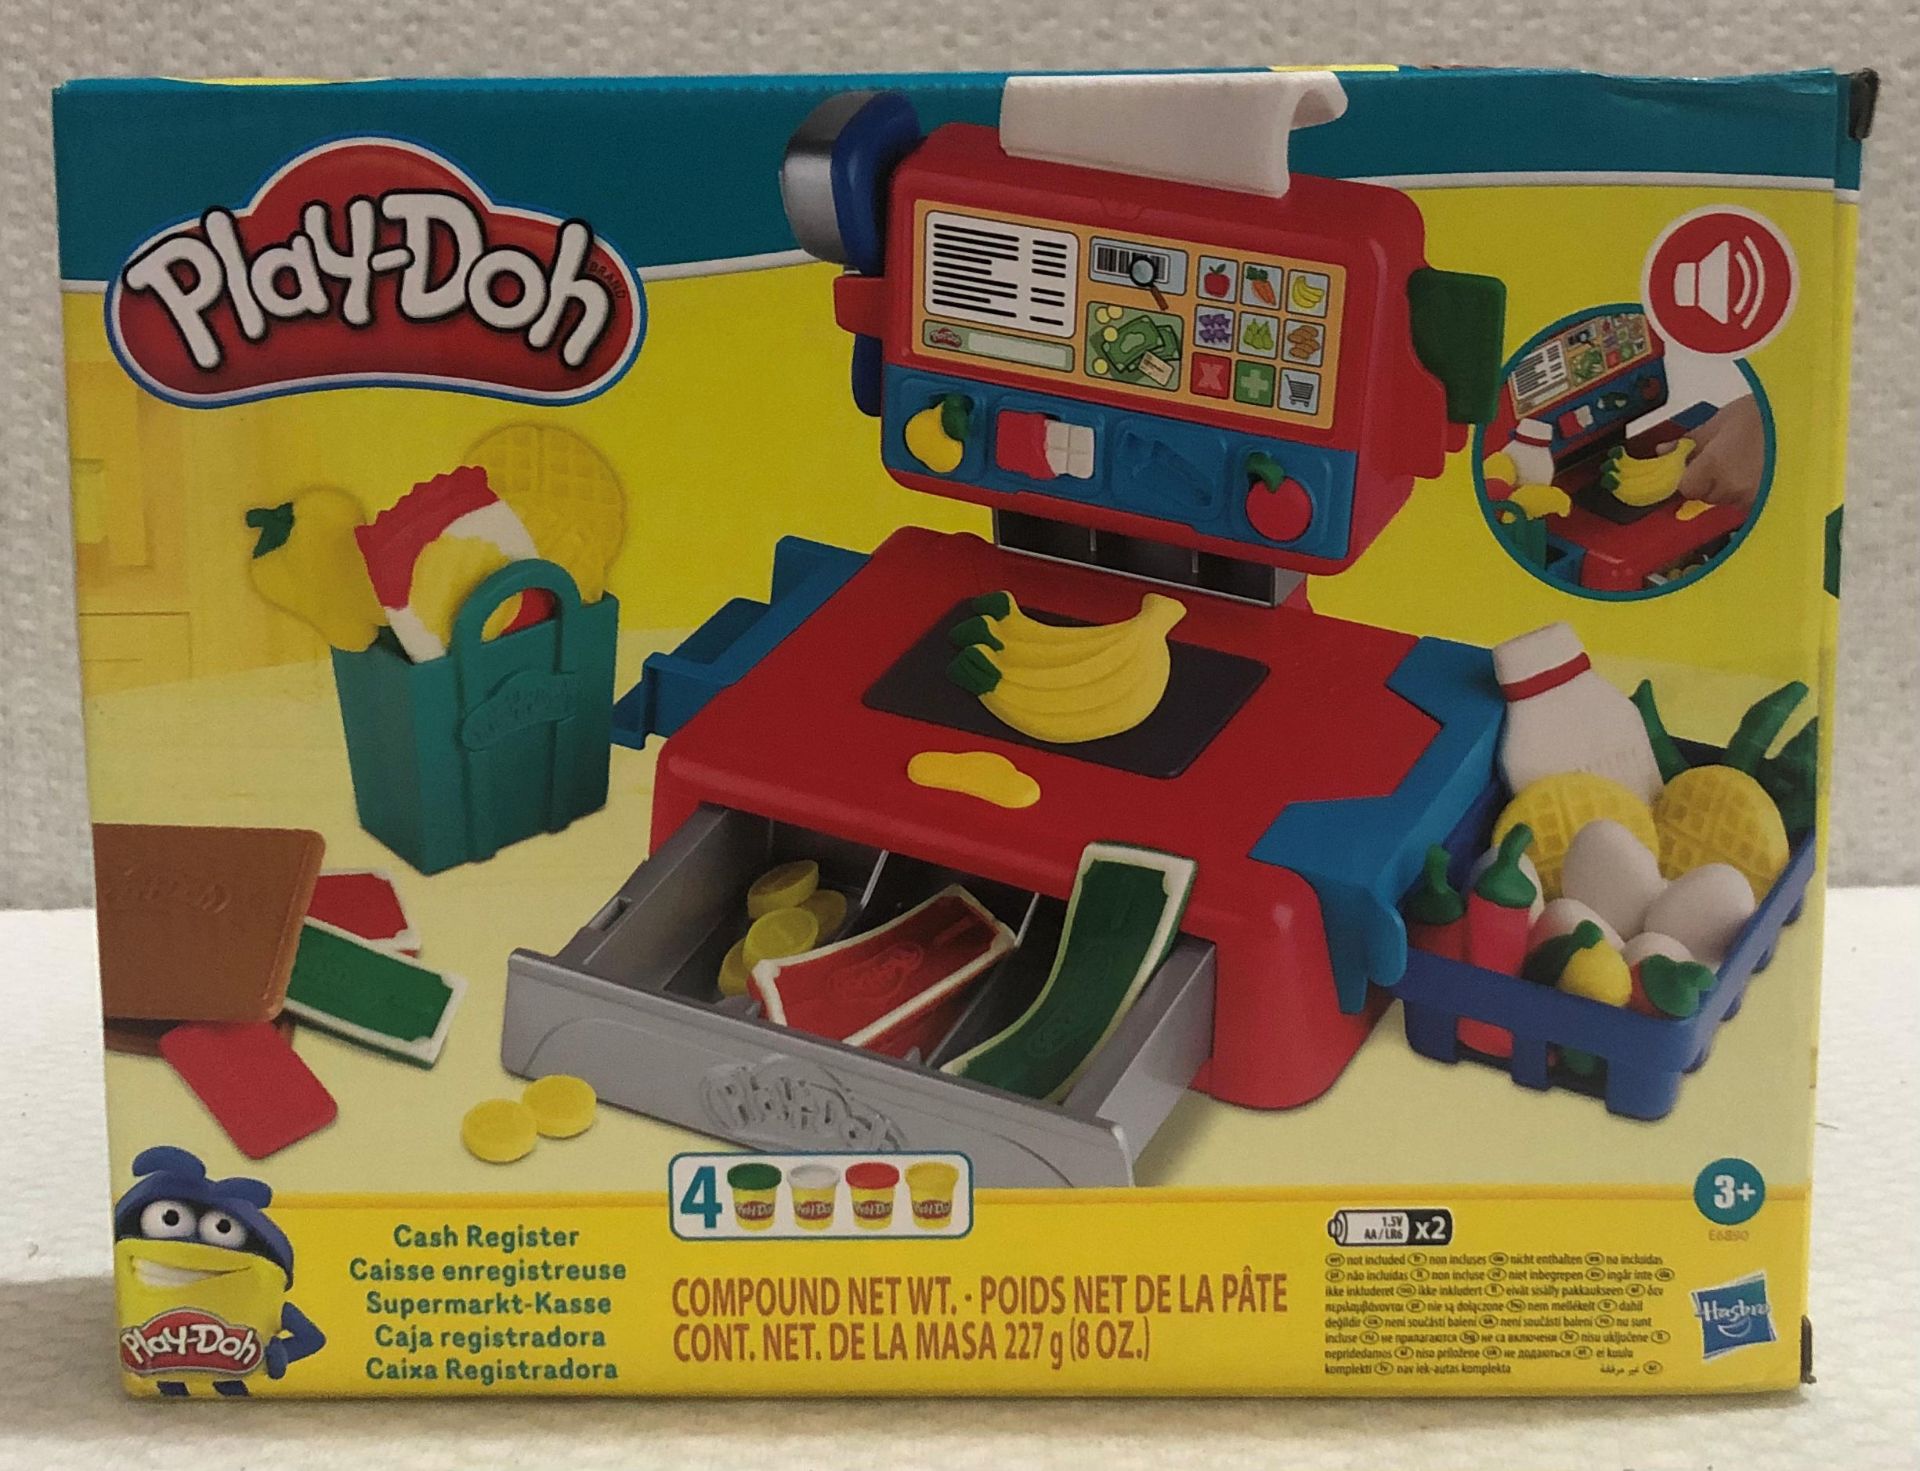 1 x Play-Doh Cash Register - New/Boxed - Image 5 of 5